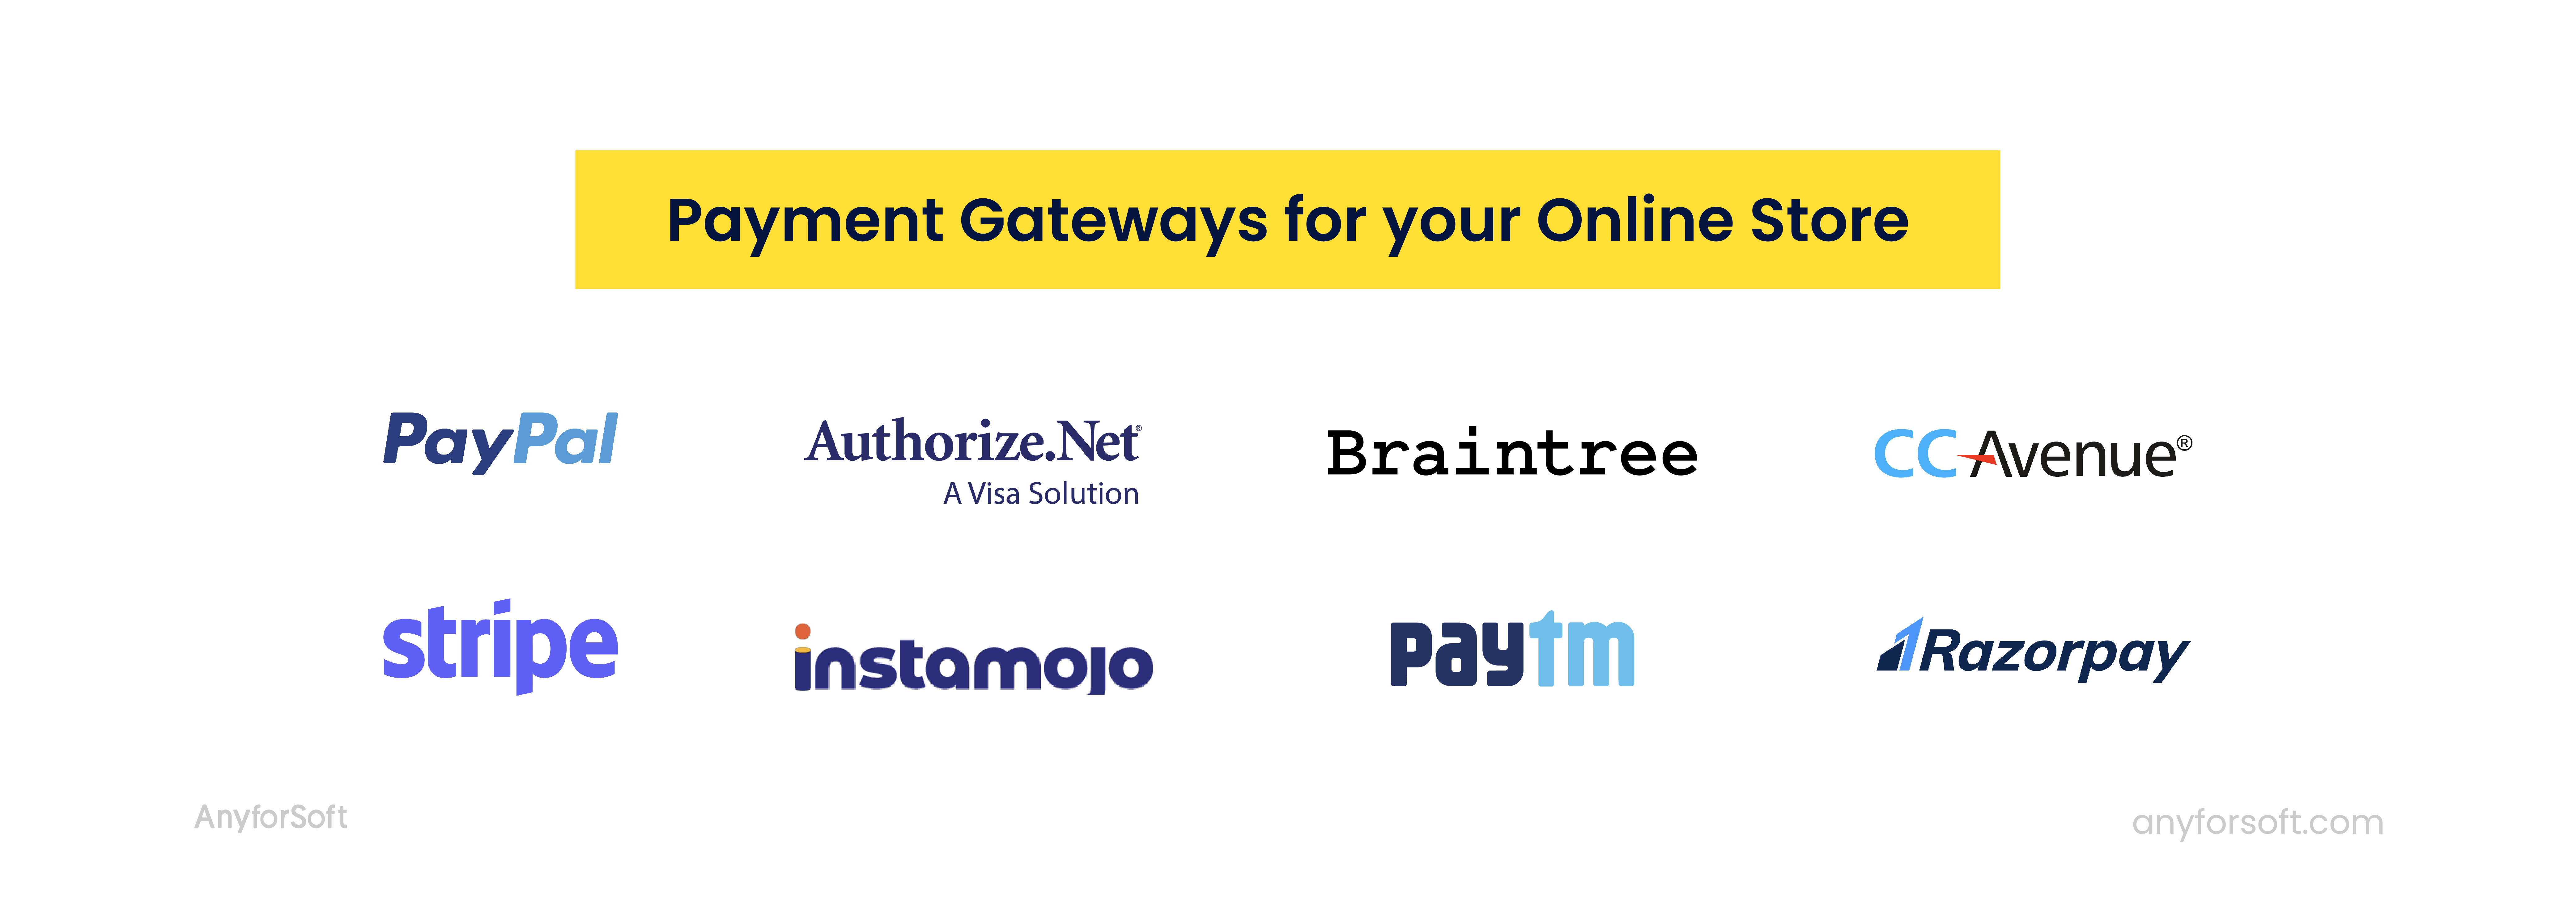 Payment gateways for your online store